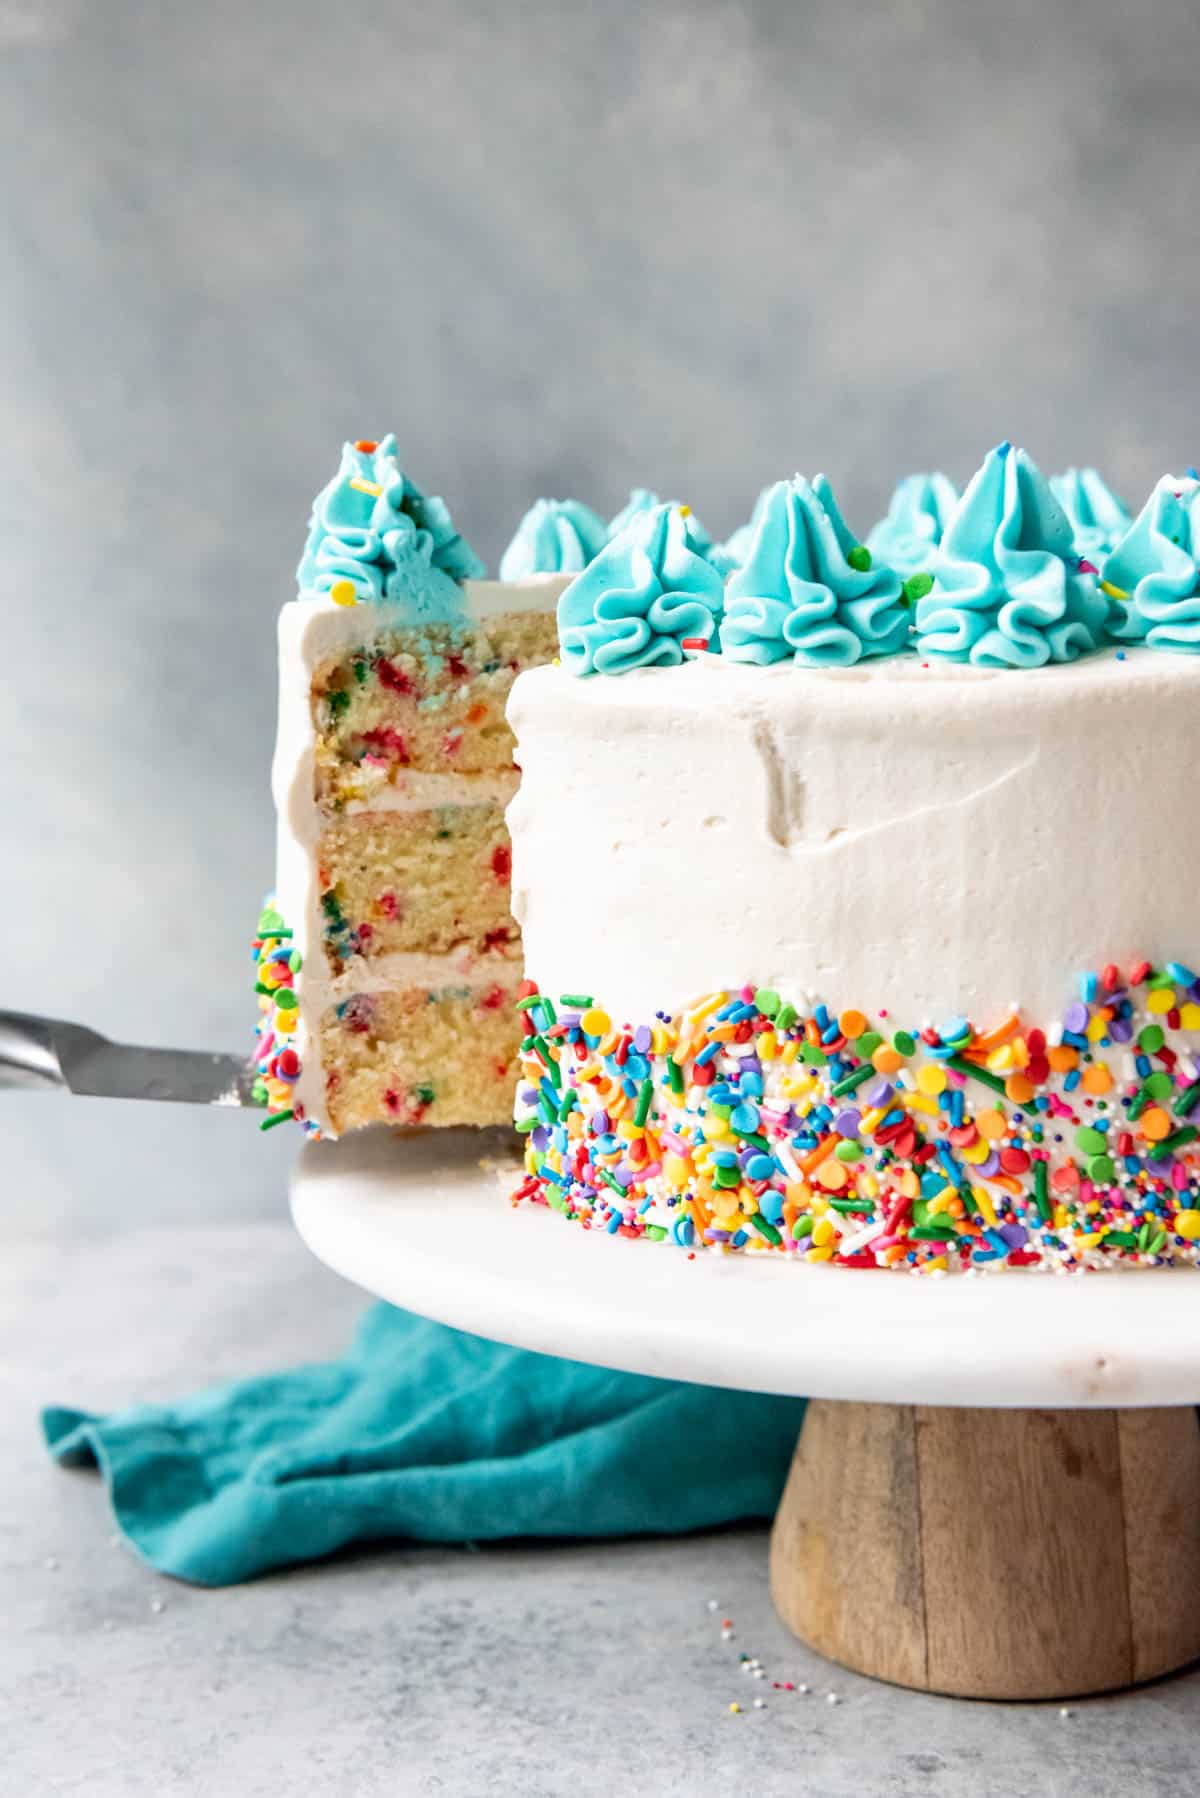 An image of a sprinkle cake with a slice being lifted out of it from the cake stand.